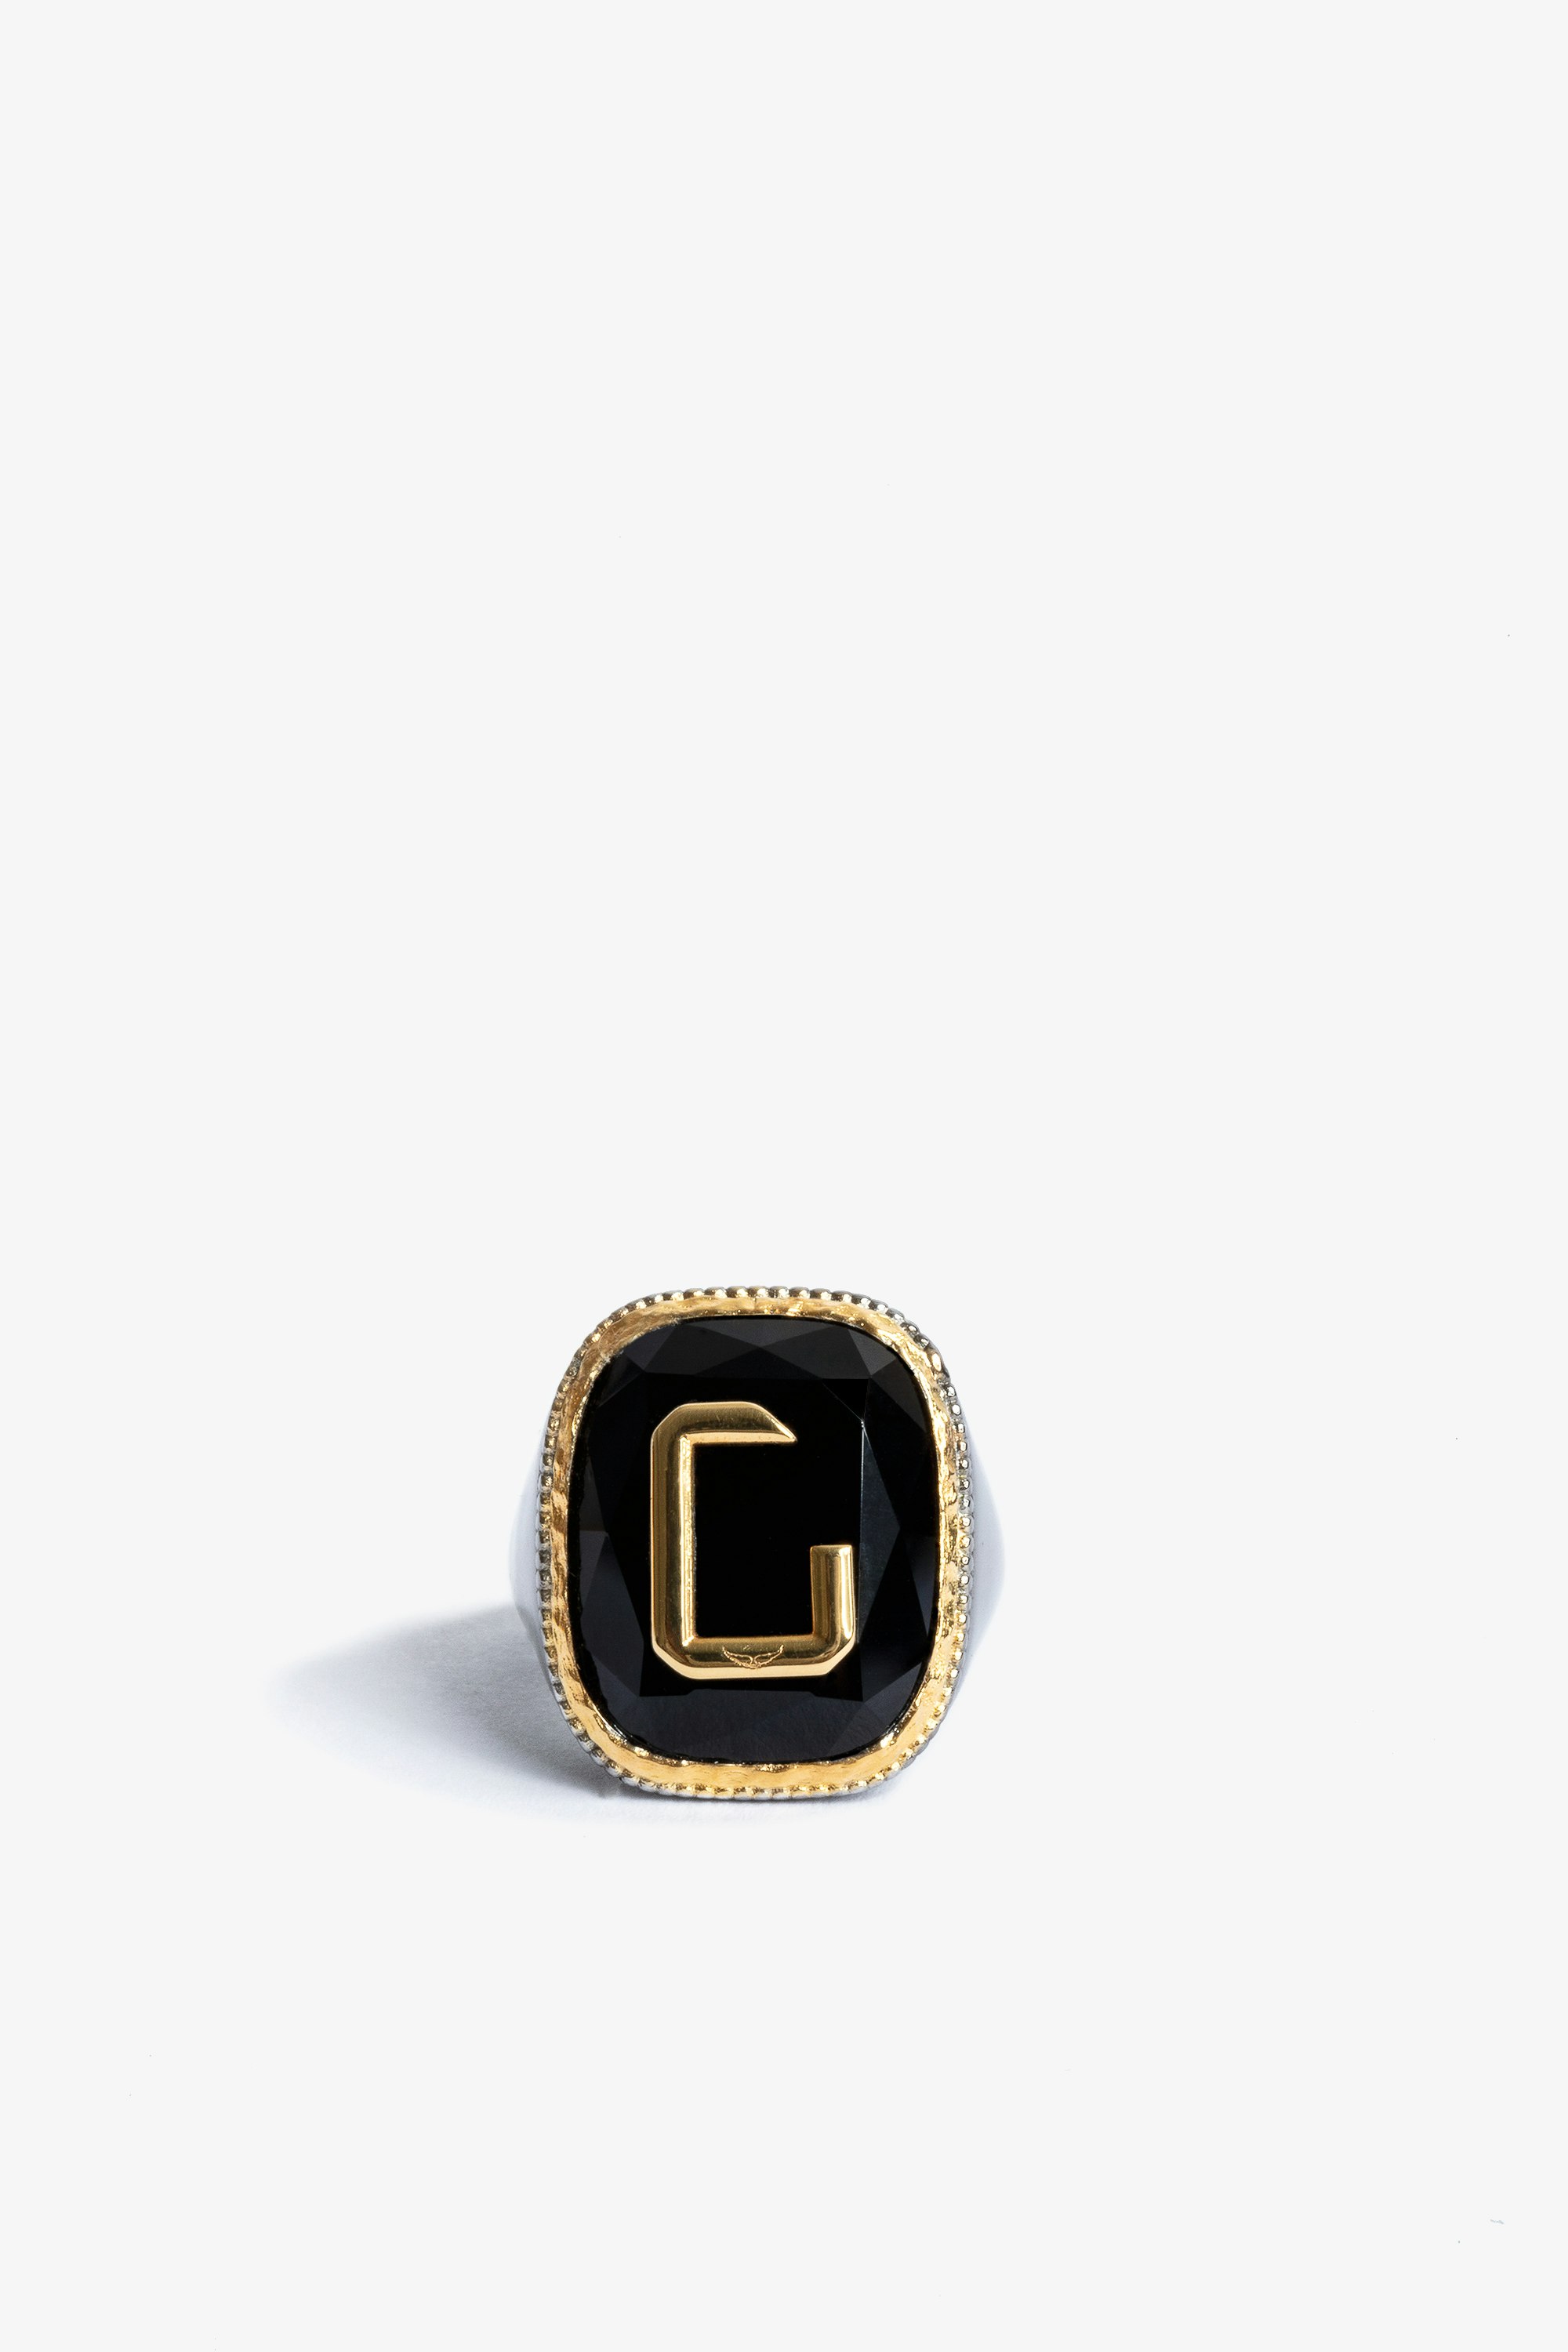 Cecilia Signet Ring Women’s blackened and gold-tone metal signet ring